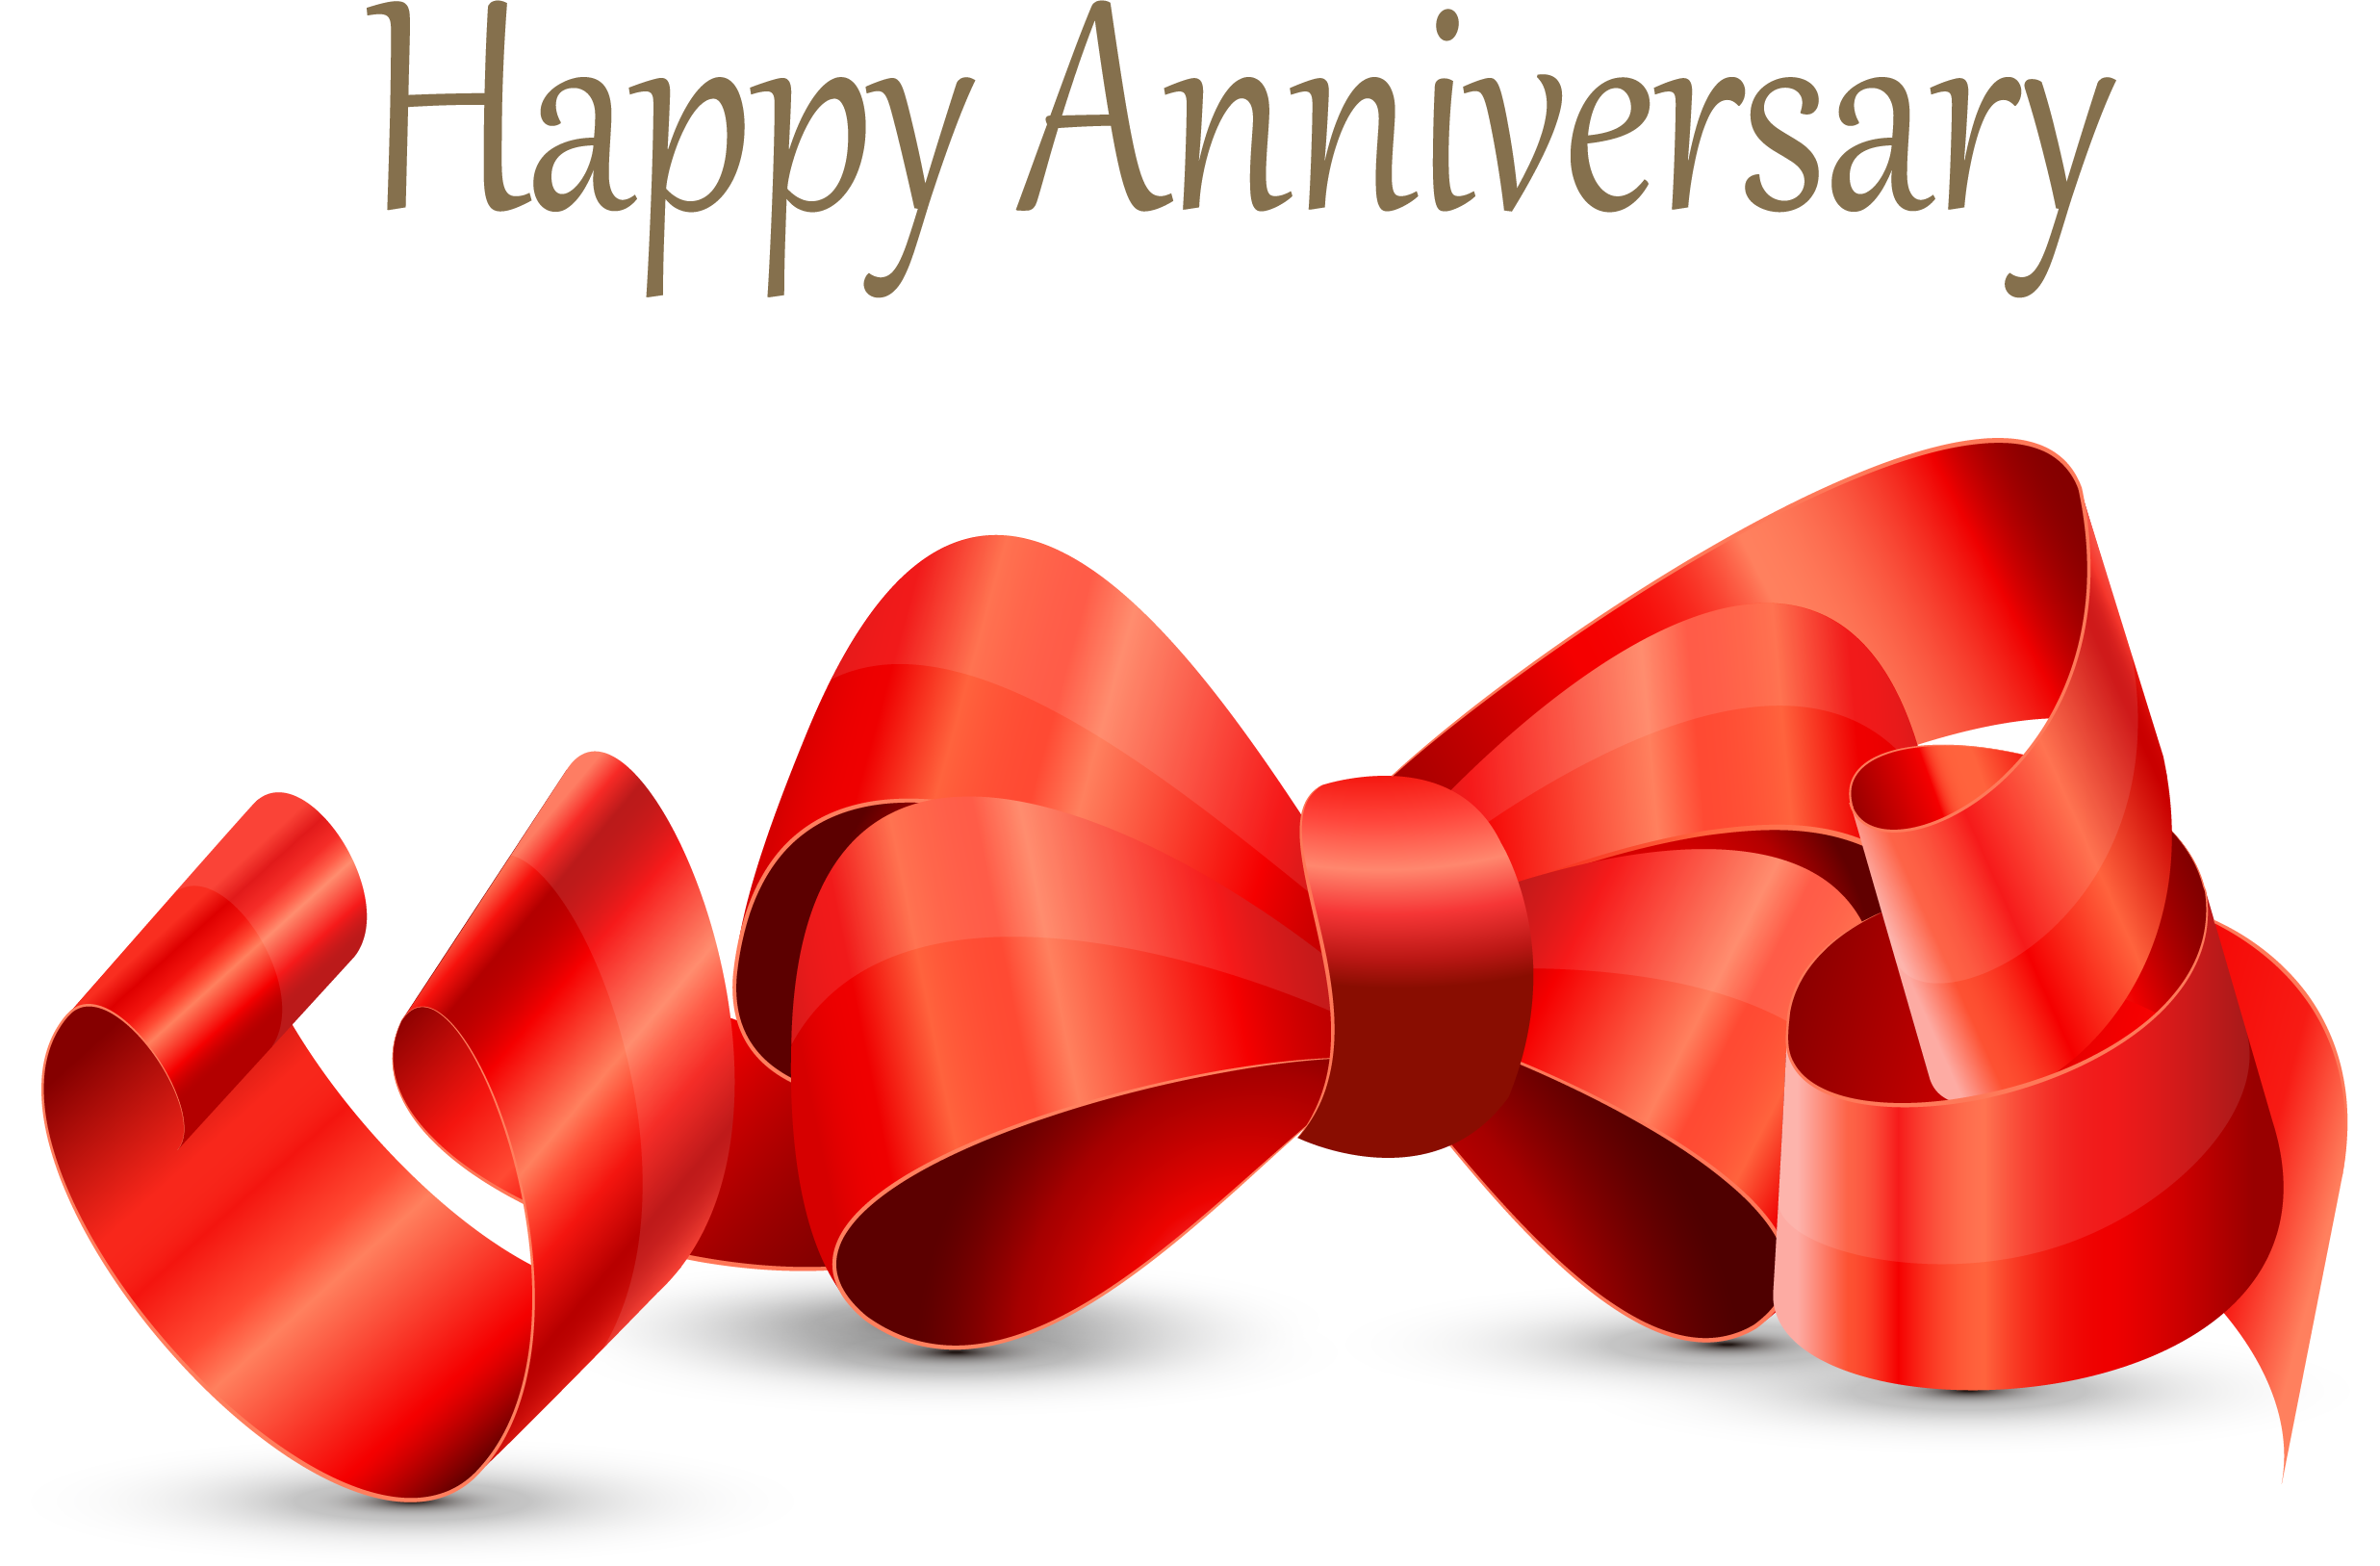 Download Heart Product Anniversary Happiness Wedding Download HQ PNG HQ